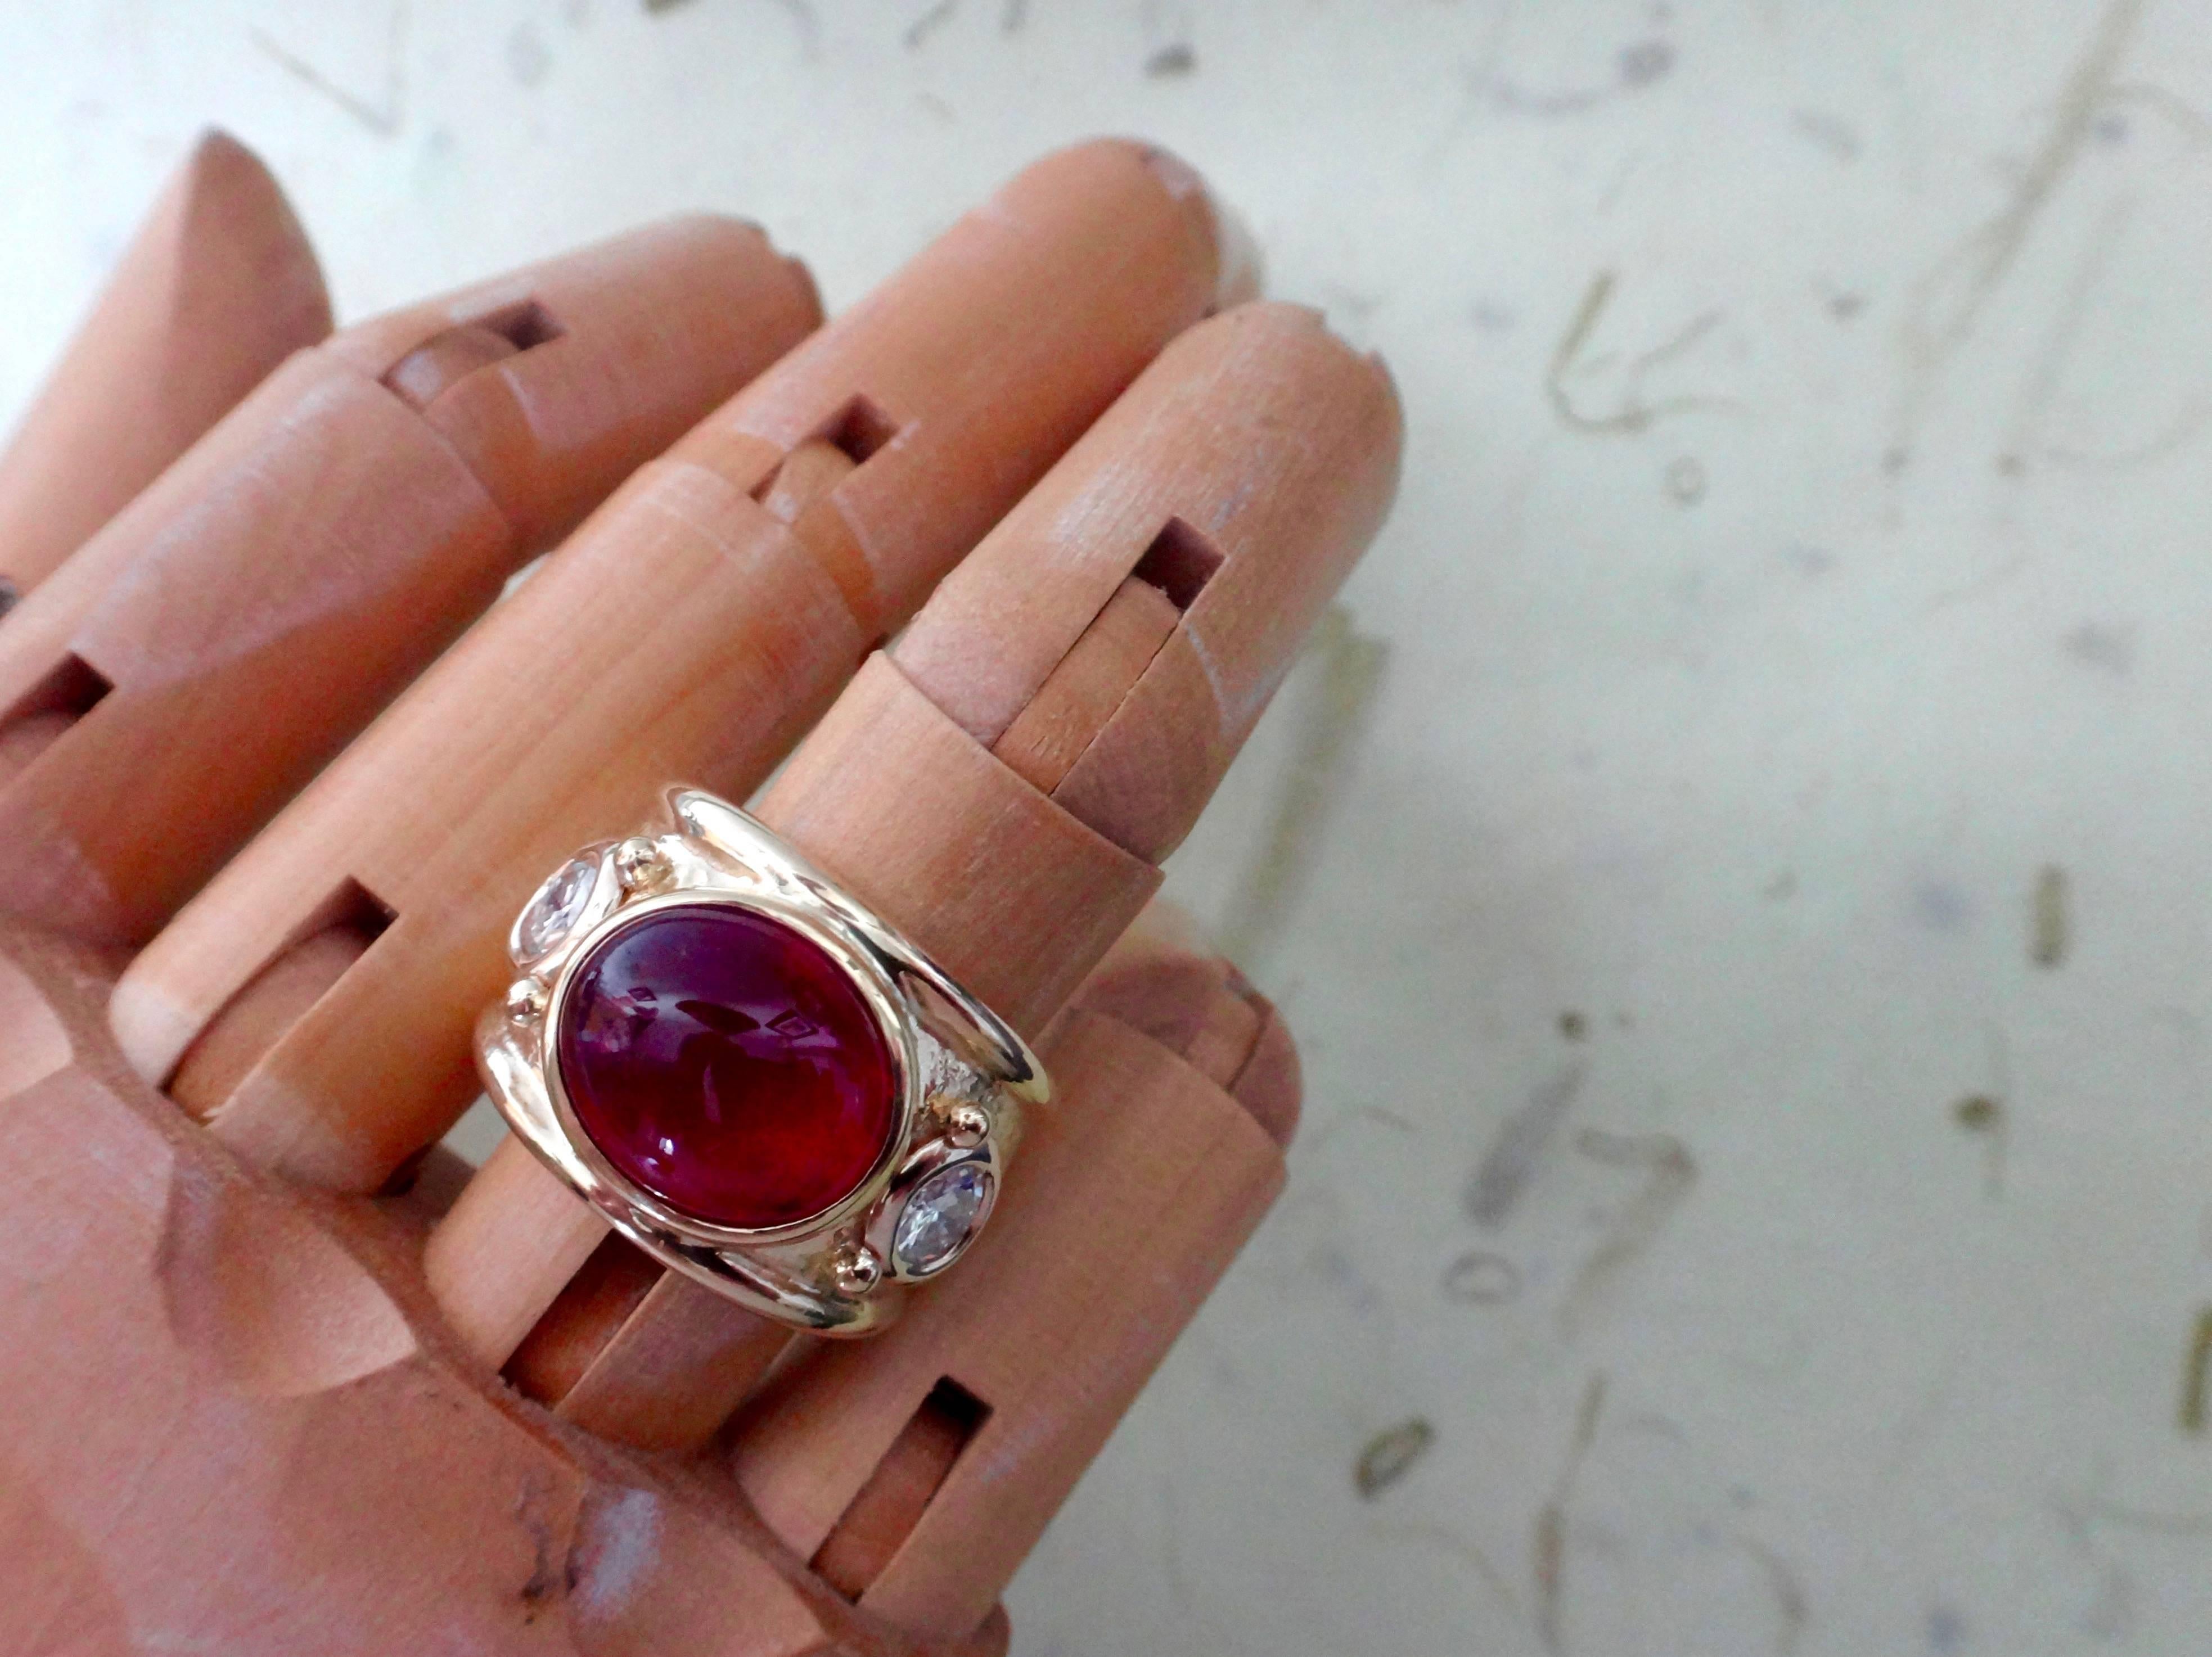 A gem quality cabochon rubelite (red tourmaline) of exceptional color and finish is flanked by a pair of brilliant cut diamonds in this "Bombe" style ring.  The three gems are bezel set in a hand fabricated, highly polished and textured